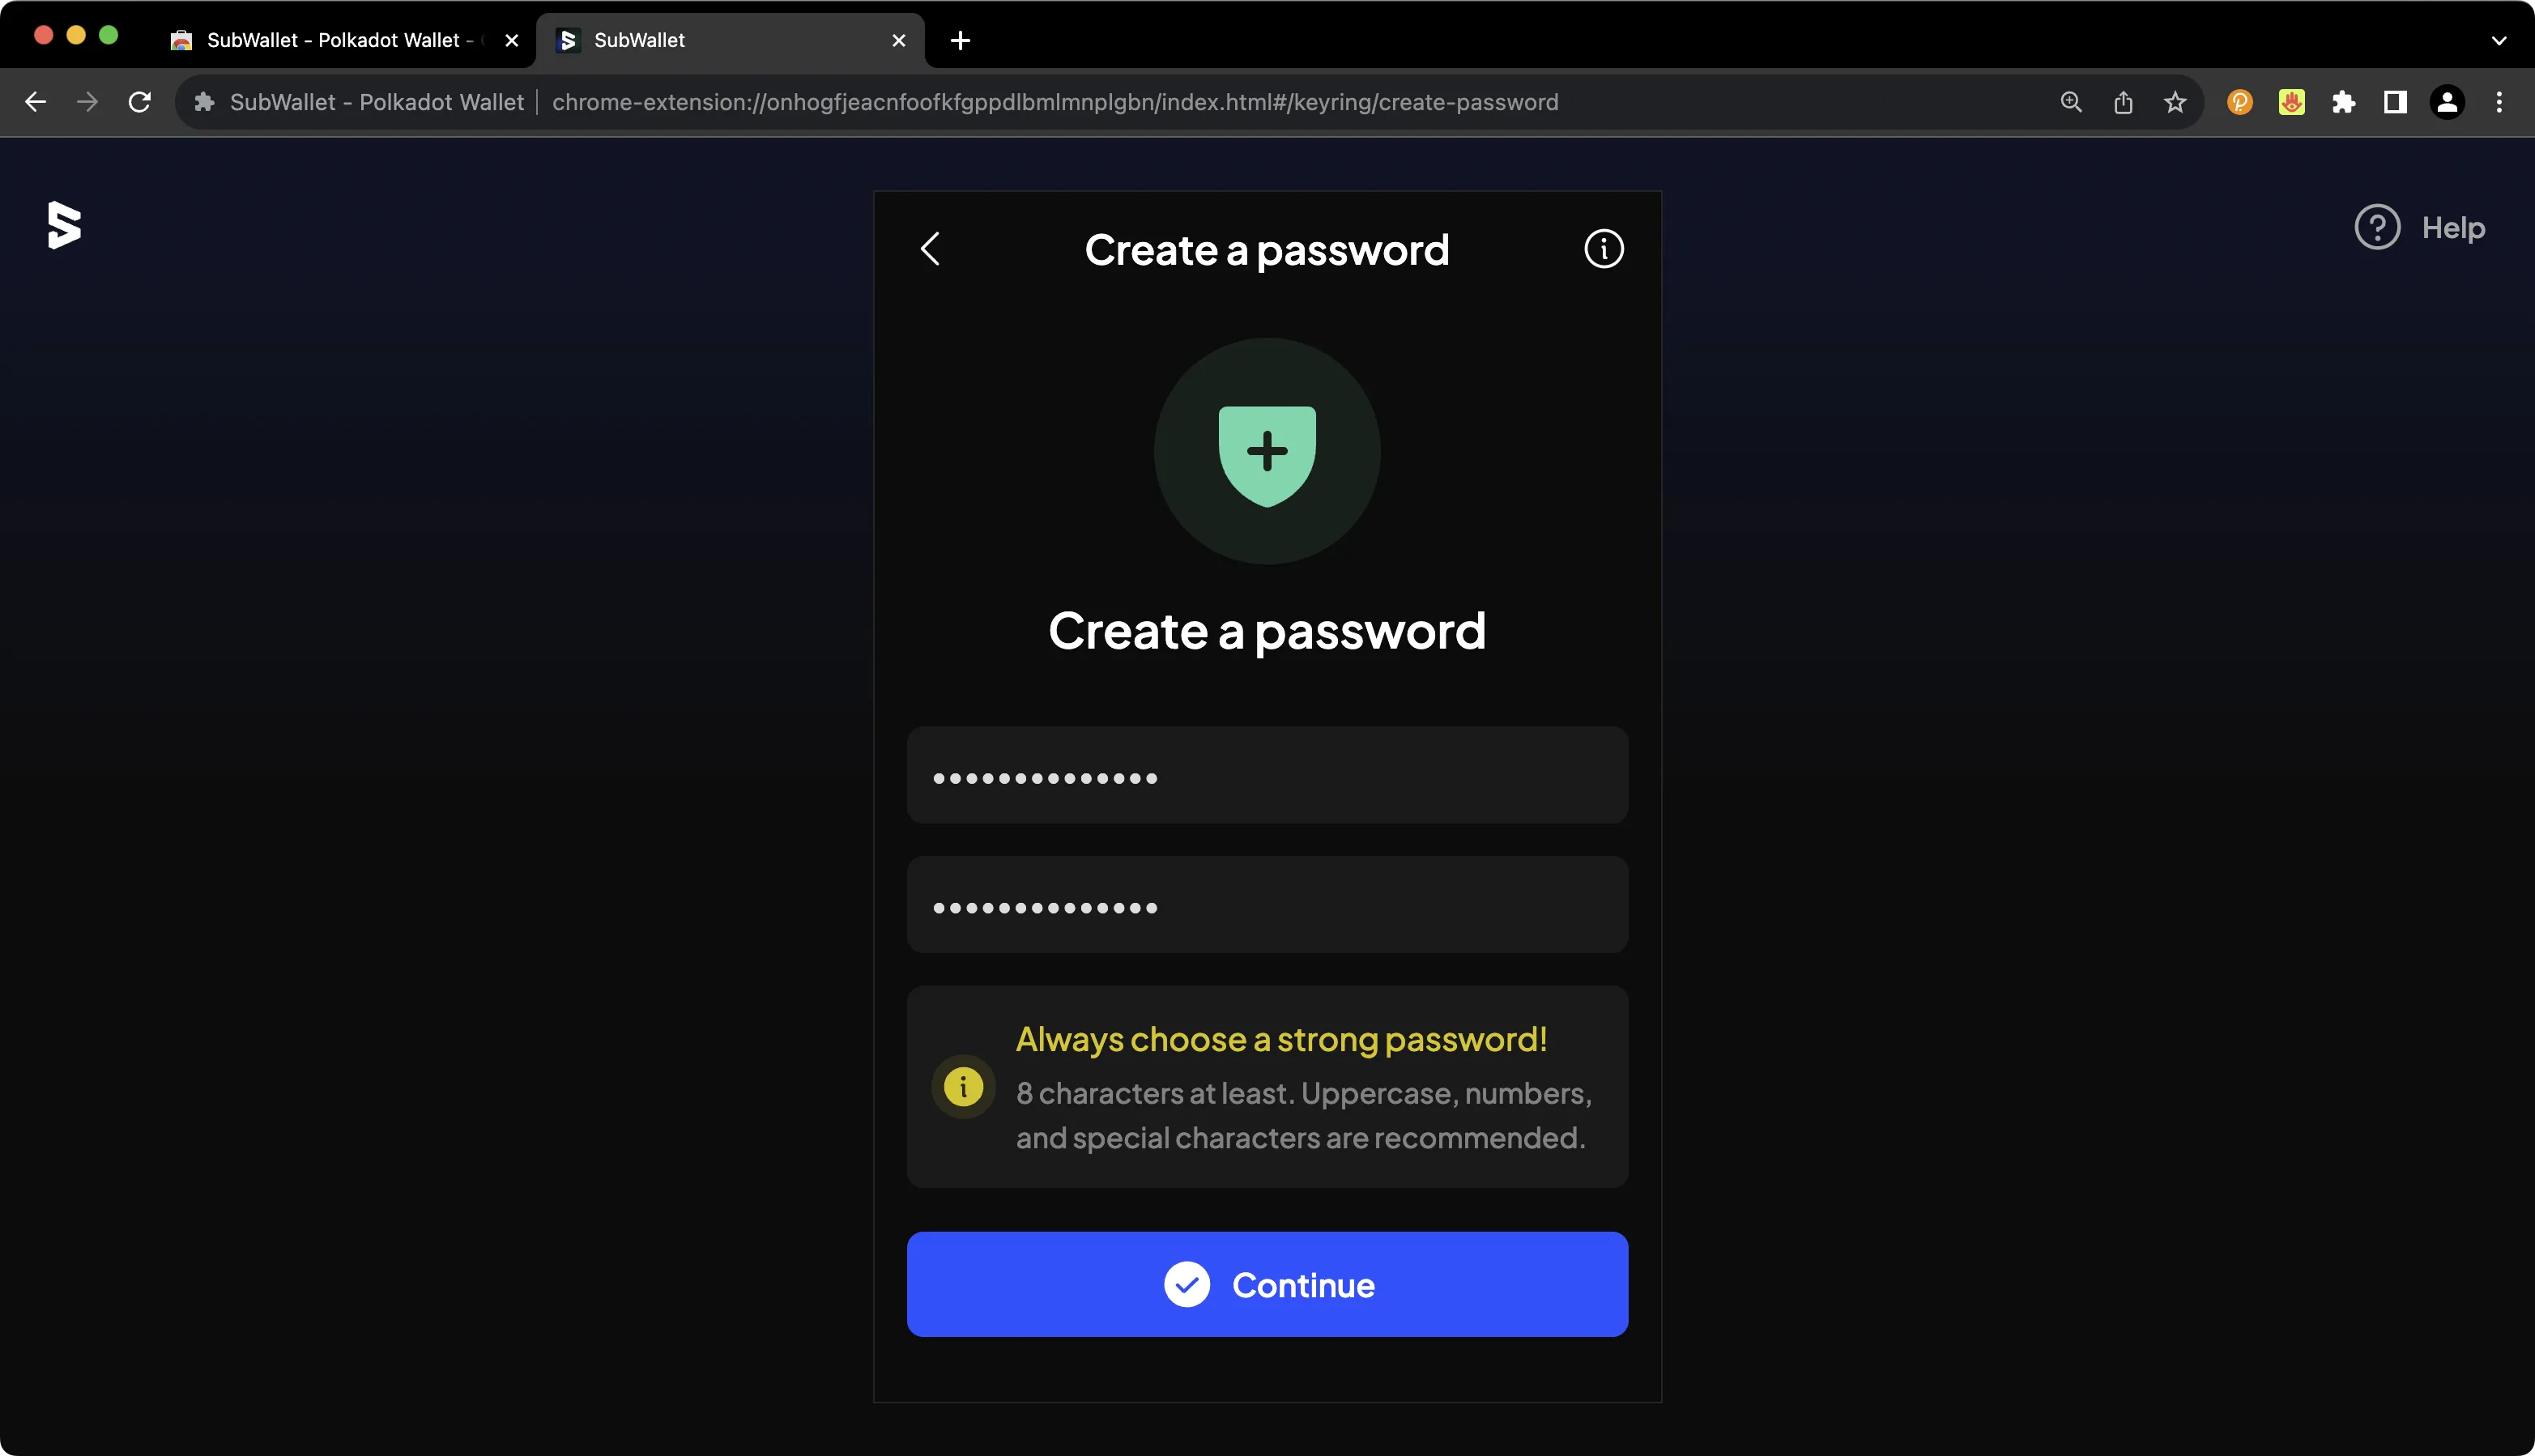 Create a password for SubWallet